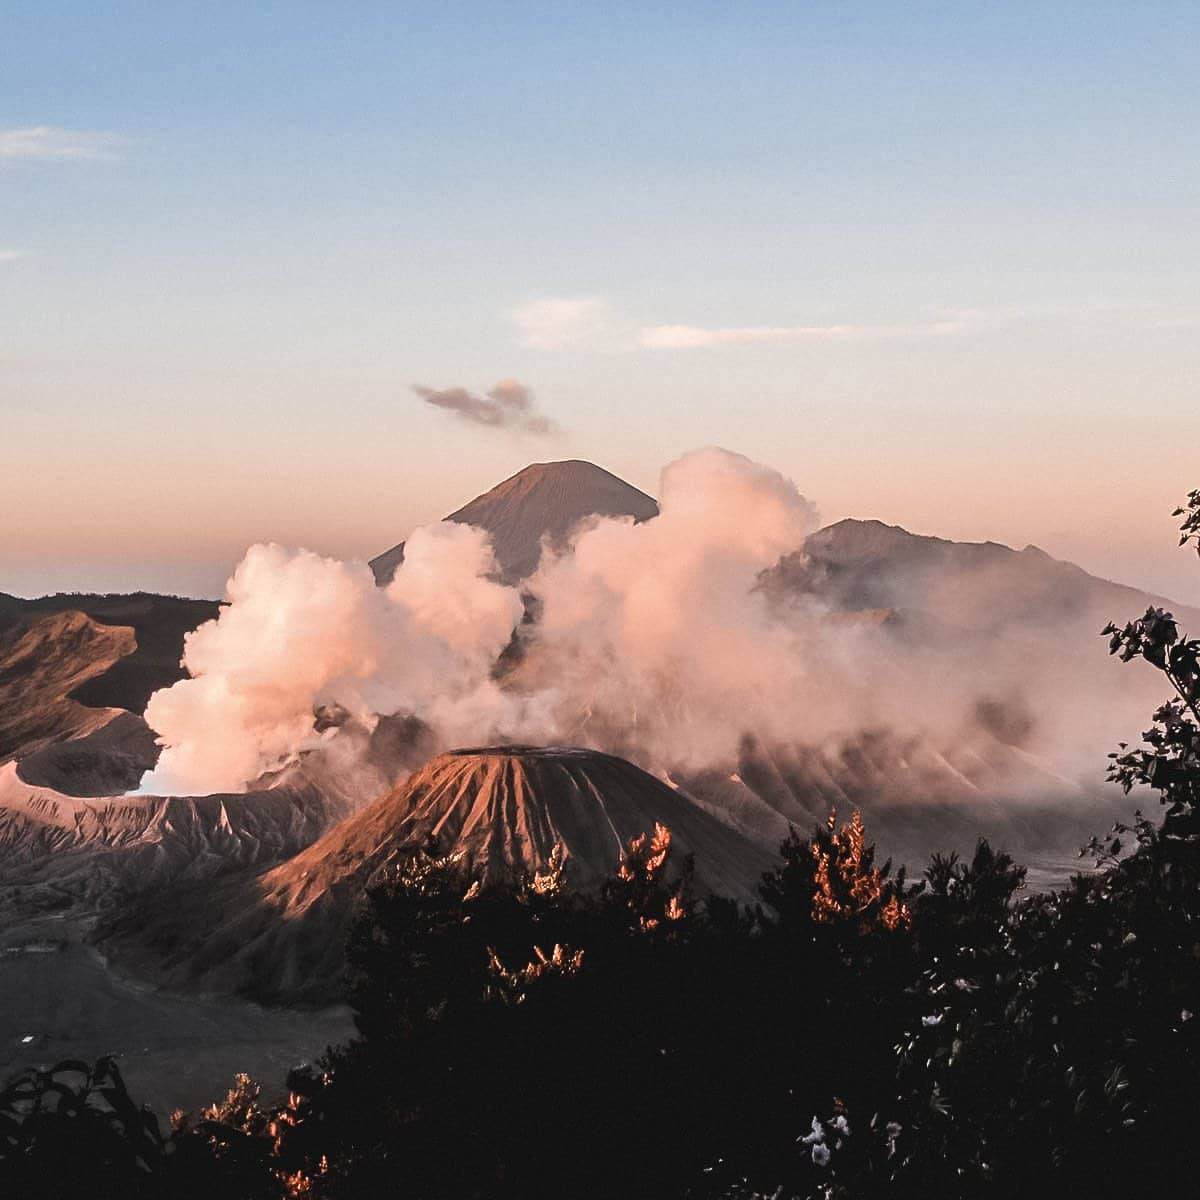 Mount Bromo in Indonesia at sunrise with clouds in the background